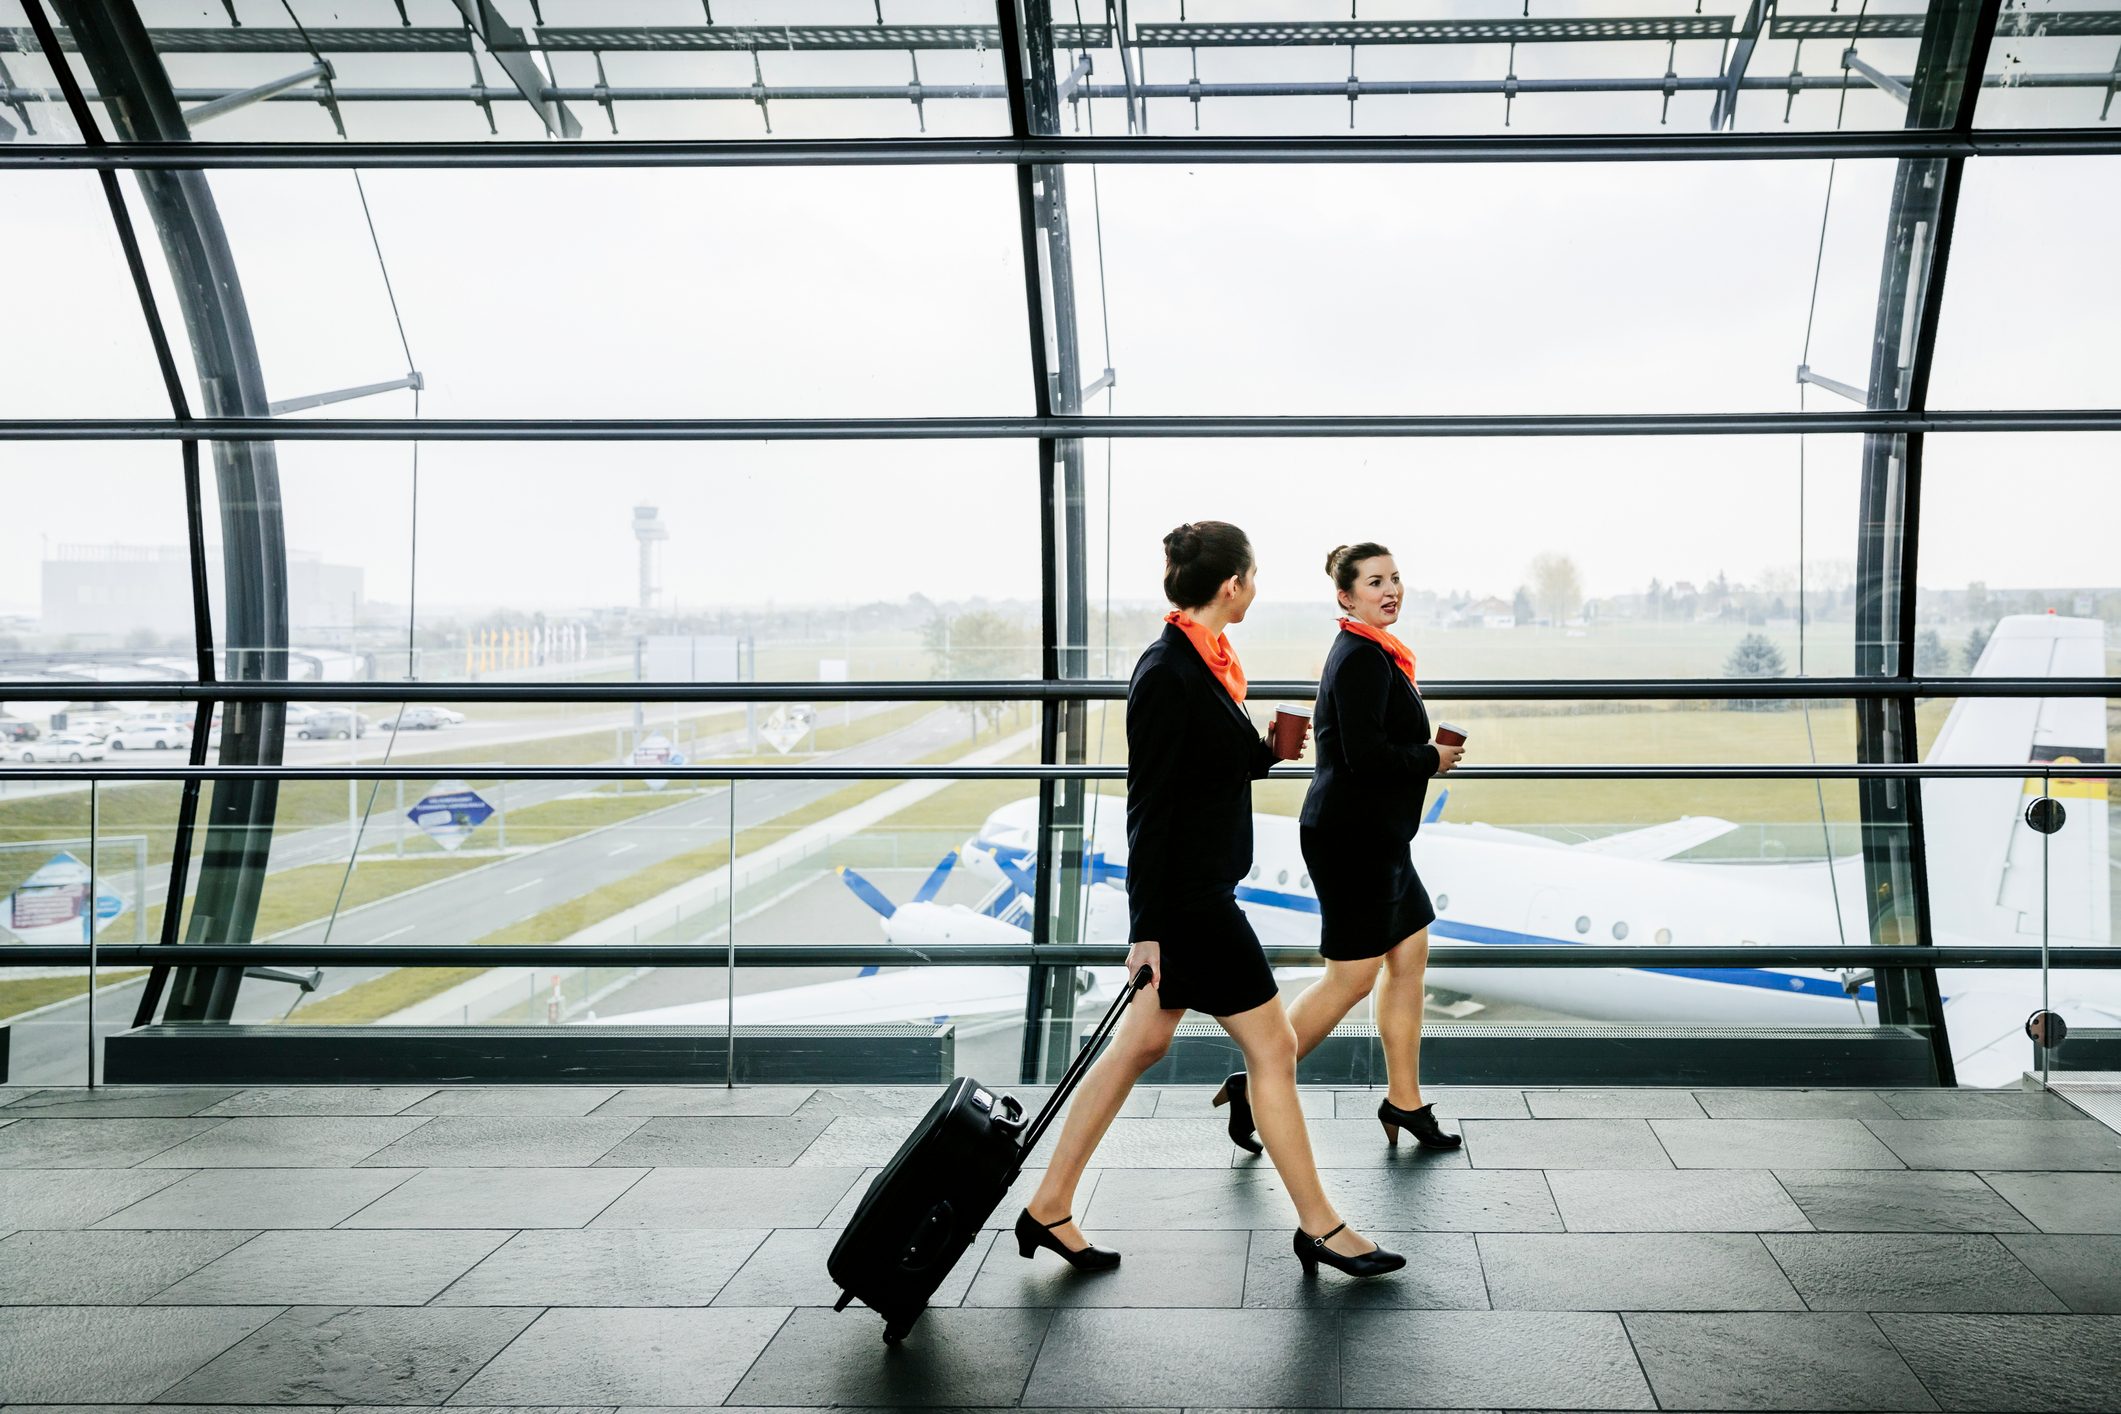 <p>Thanks mostly to Hollywood, flight attendants have gotten a wild reputation, but the truth is, most of them don't hook up in every city. "I'm married, but honestly, I'm too exhausted to go swiping through Tinder anyhow," says Ashley M. "After I land, all I want is sleep." If you're looking to snooze during your flight, find out <a href="https://www.rd.com/list/shouldnt-wear-on-airplane/" rel="noopener noreferrer">what to wear on a plane</a> for optimal comfort and convenience.</p>